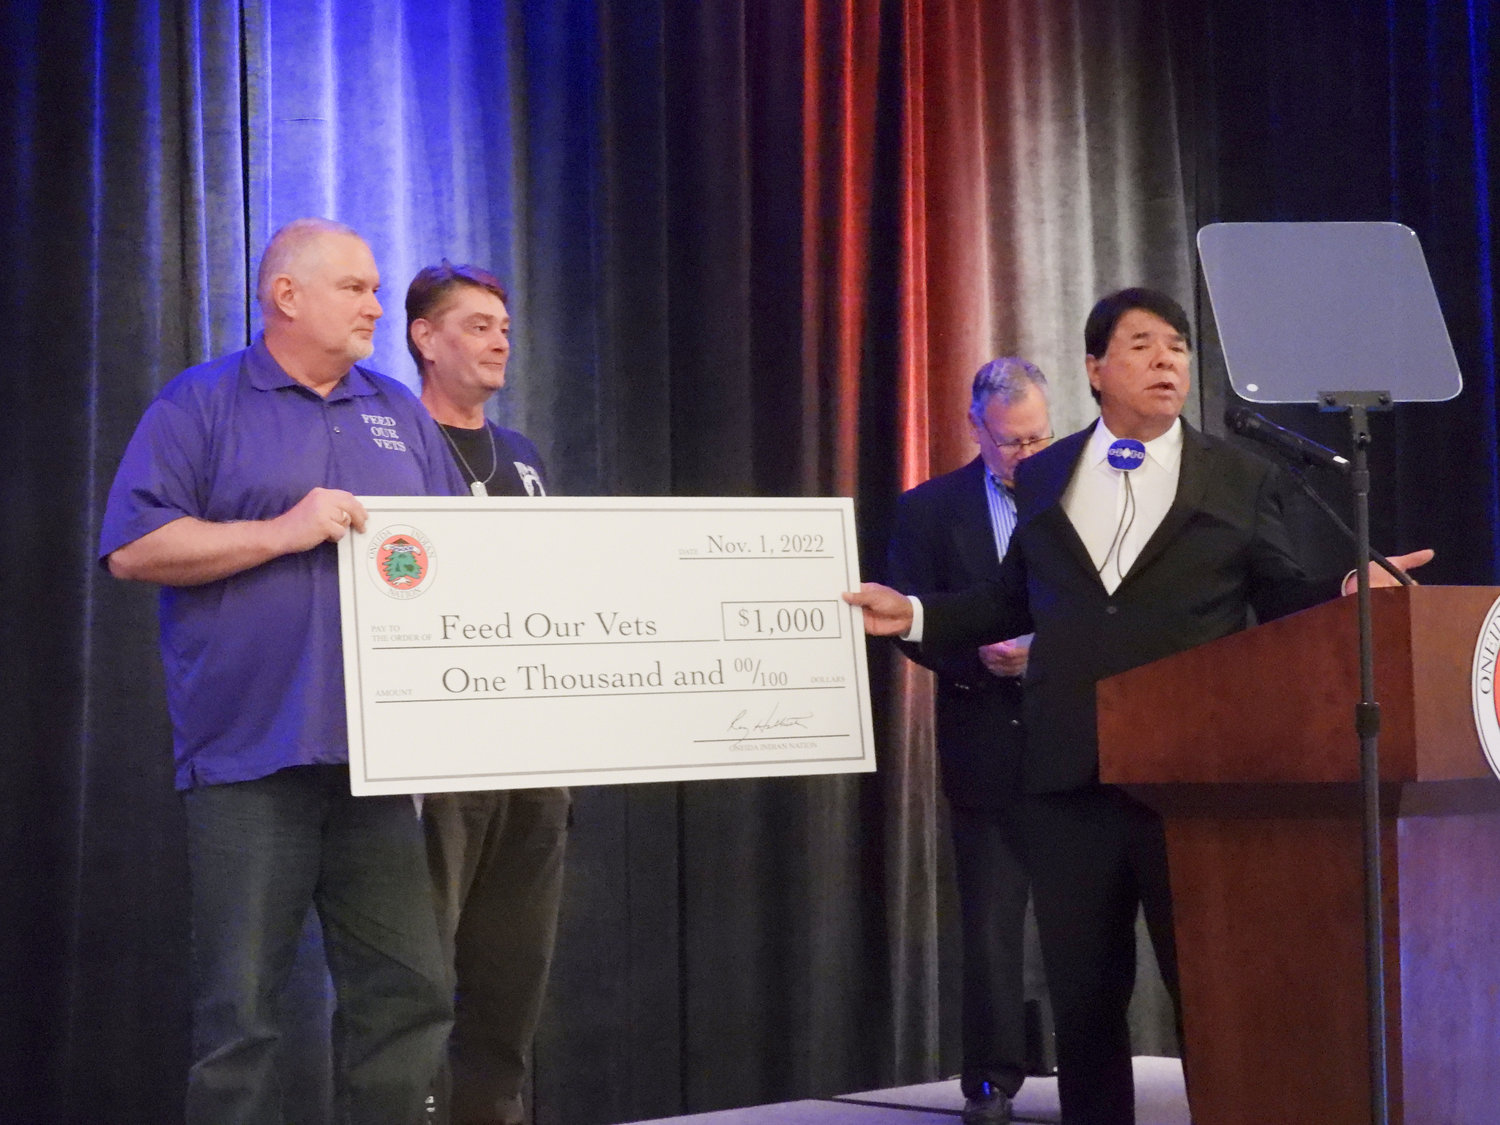 OIN Representative Ray Halbritter presents the Feed Our Vets program with a $1,000 check at the 21st annual Veterans Recognition Ceremony and Breakfast hosted by the Oneida Indian Nation on Tuesday, Nov. 1